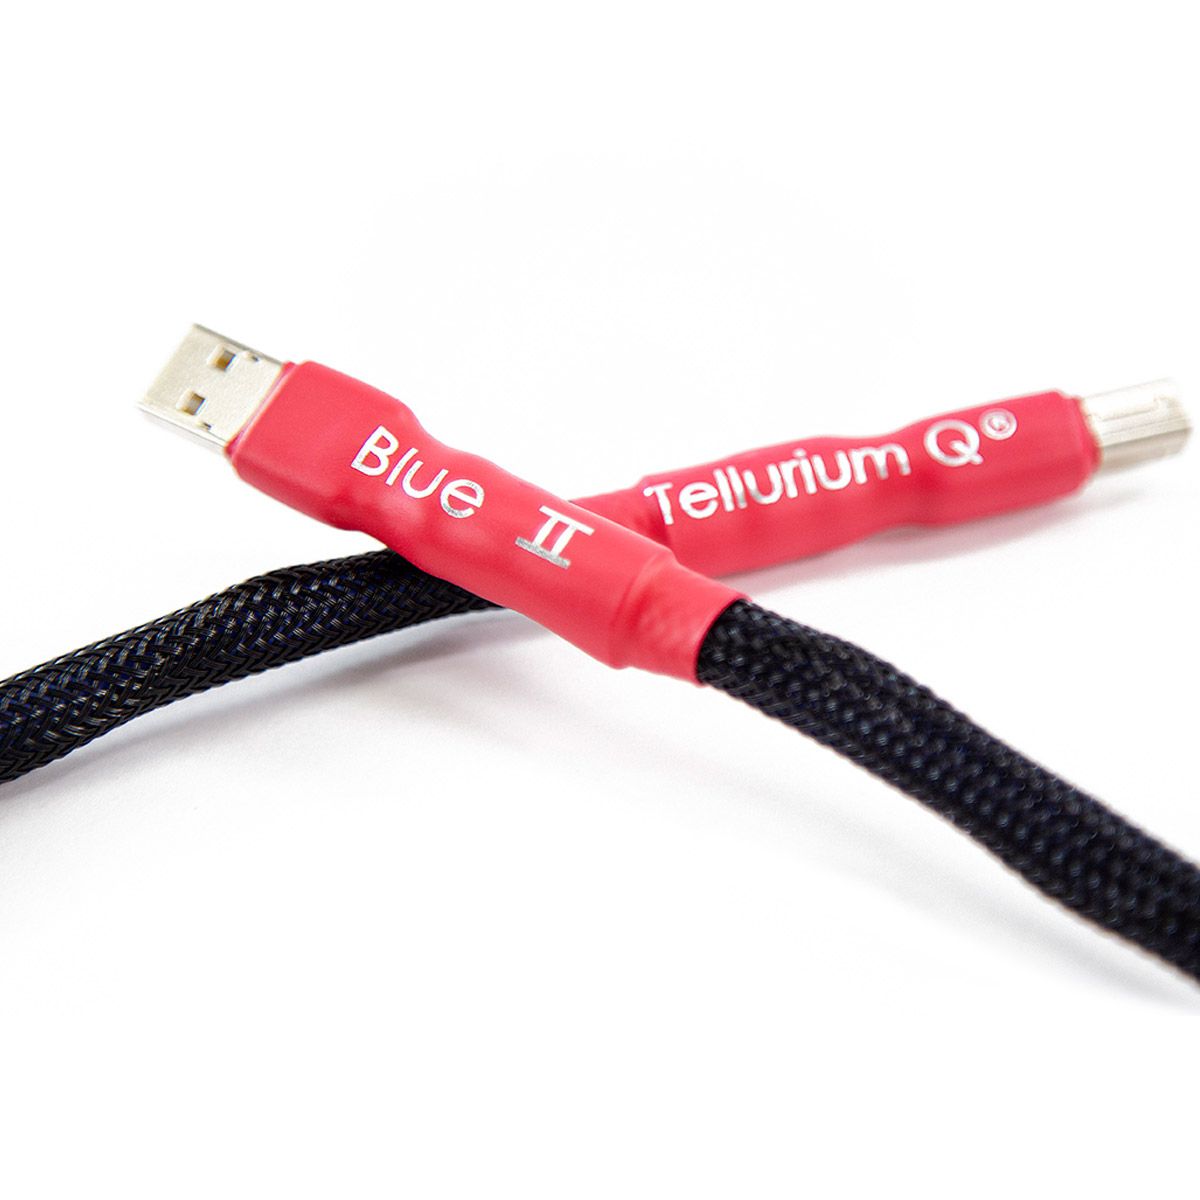 Tellurium Q Blue II USB Type A to Type B Cable